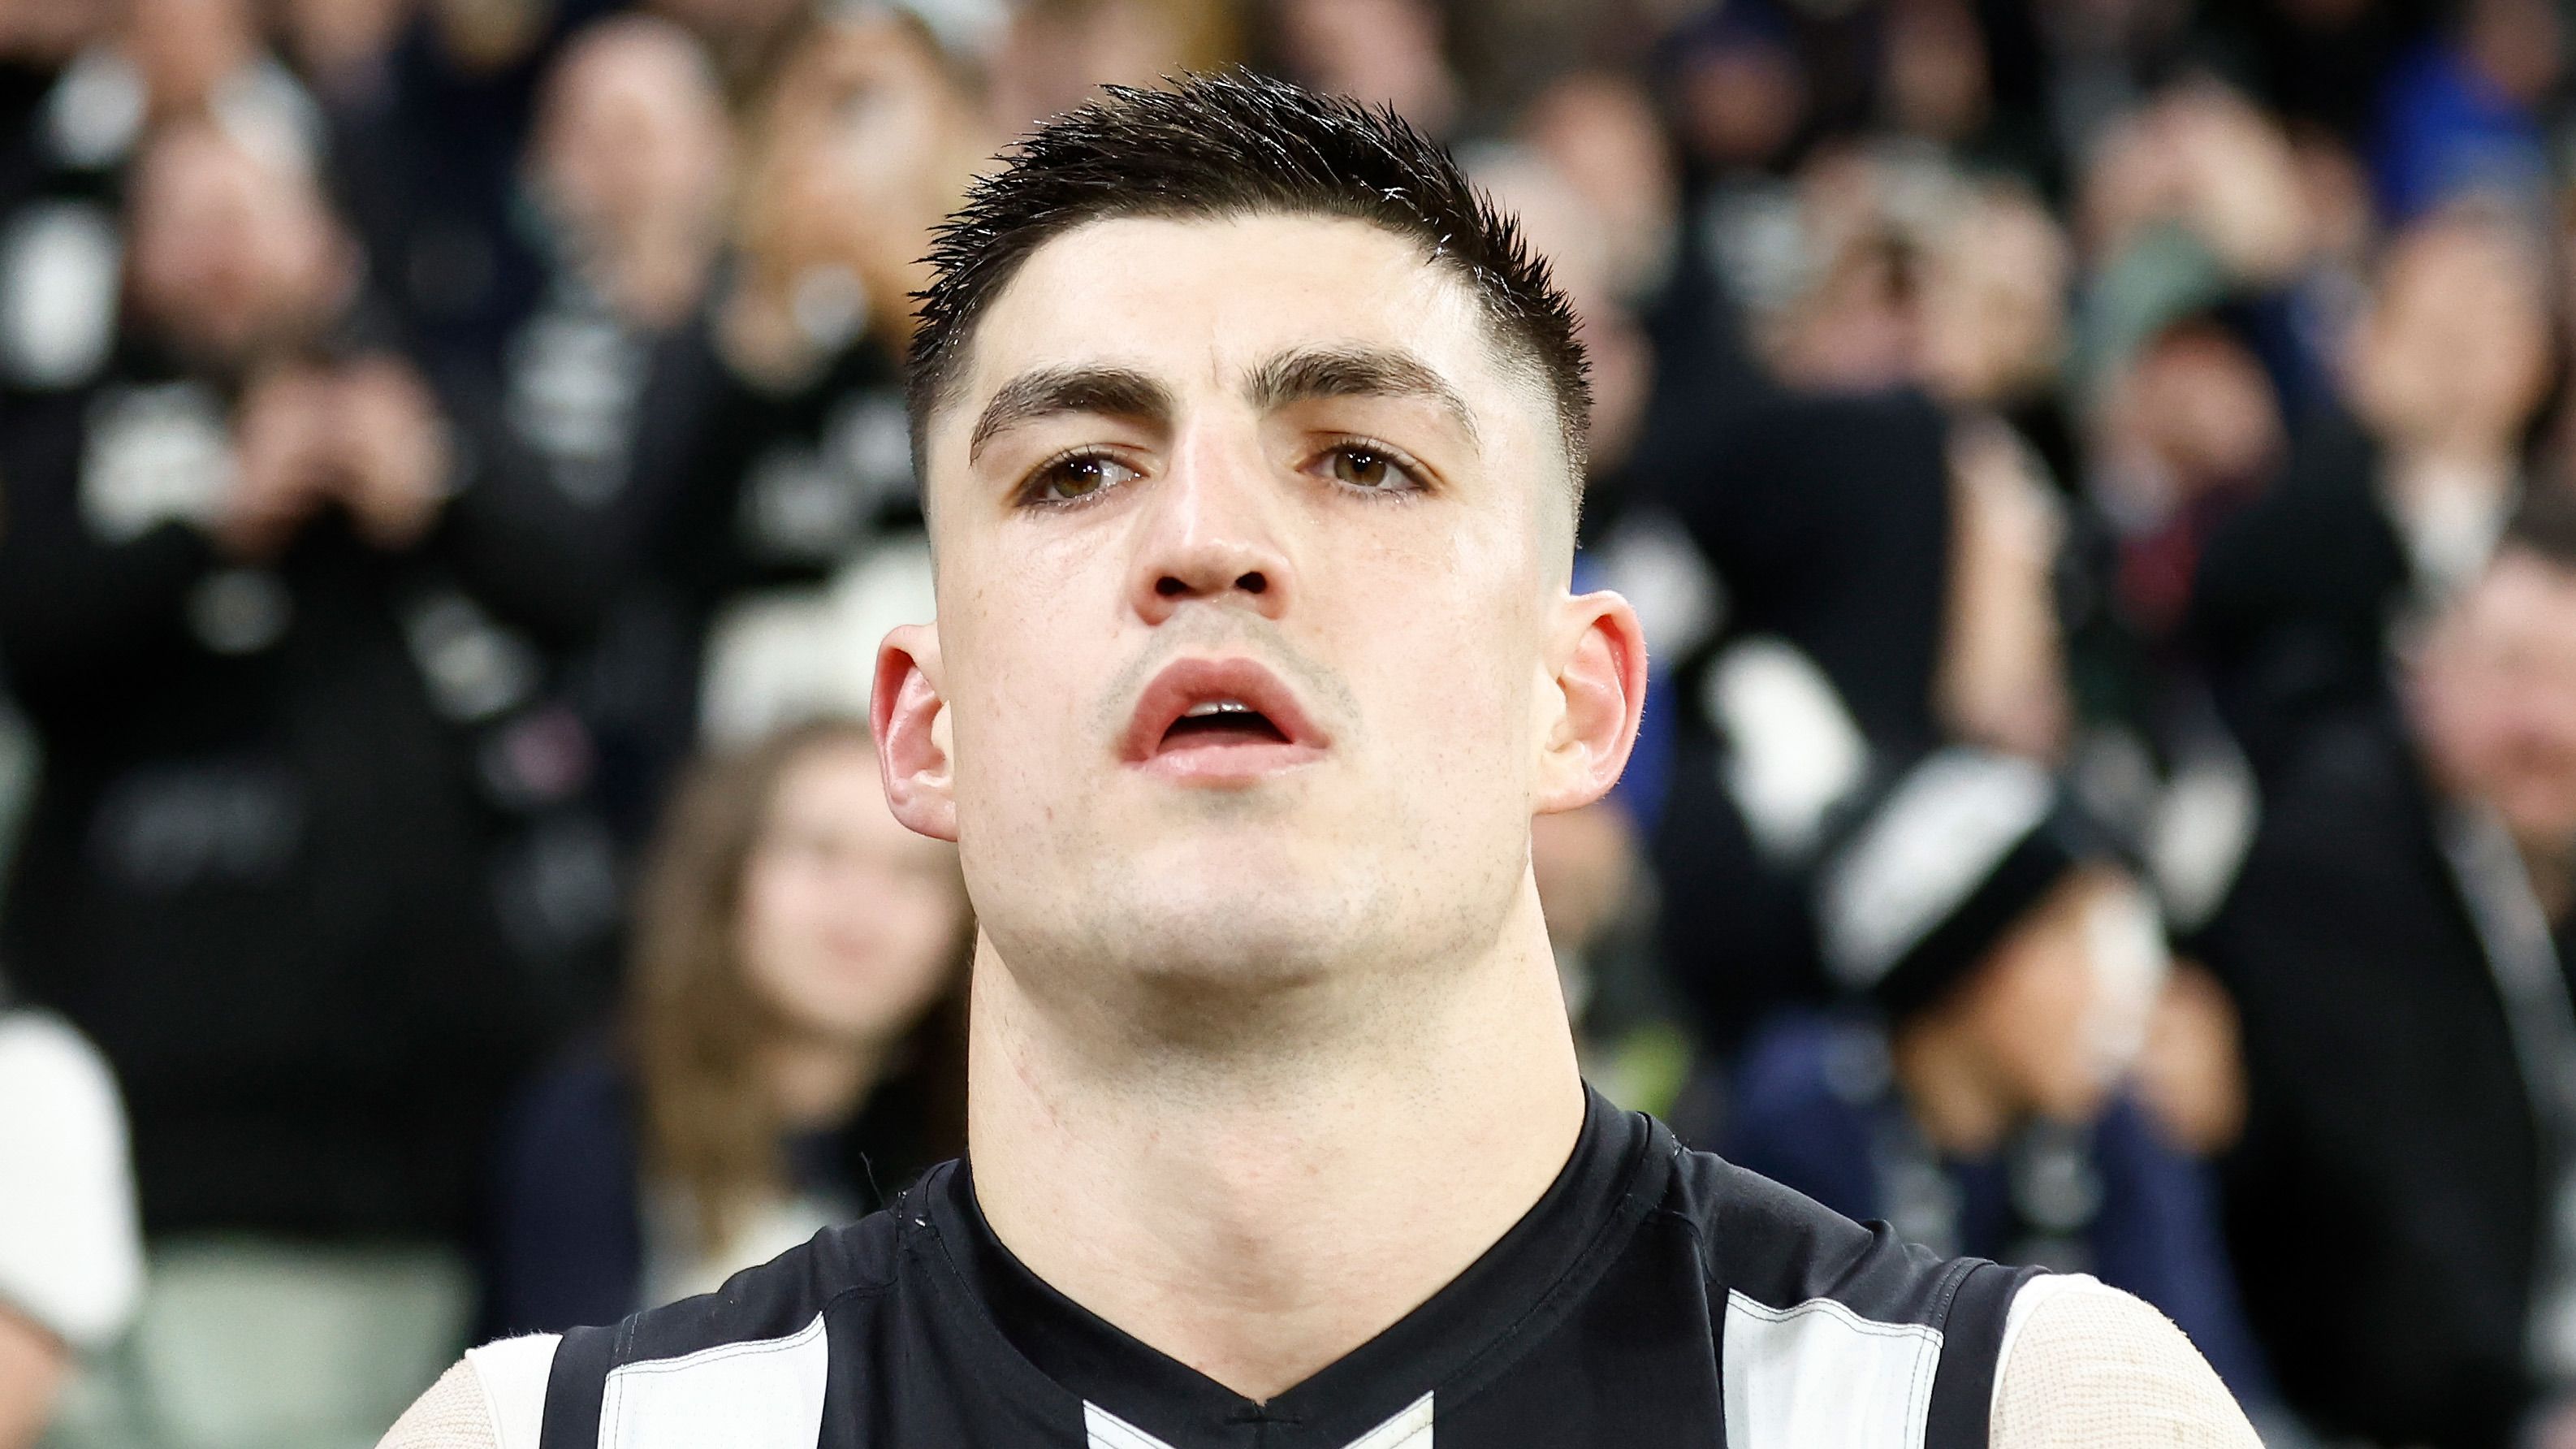 MELBOURNE, AUSTRALIA - SEPTEMBER 07: Brayden Maynard of the Magpies looks on during the 2023 AFL First Qualifying Final match between the Collingwood Magpies and the Melbourne Demons at Melbourne Cricket Ground on September 07, 2023 in Melbourne, Australia. (Photo by Michael Willson/AFL Photos via Getty Images)